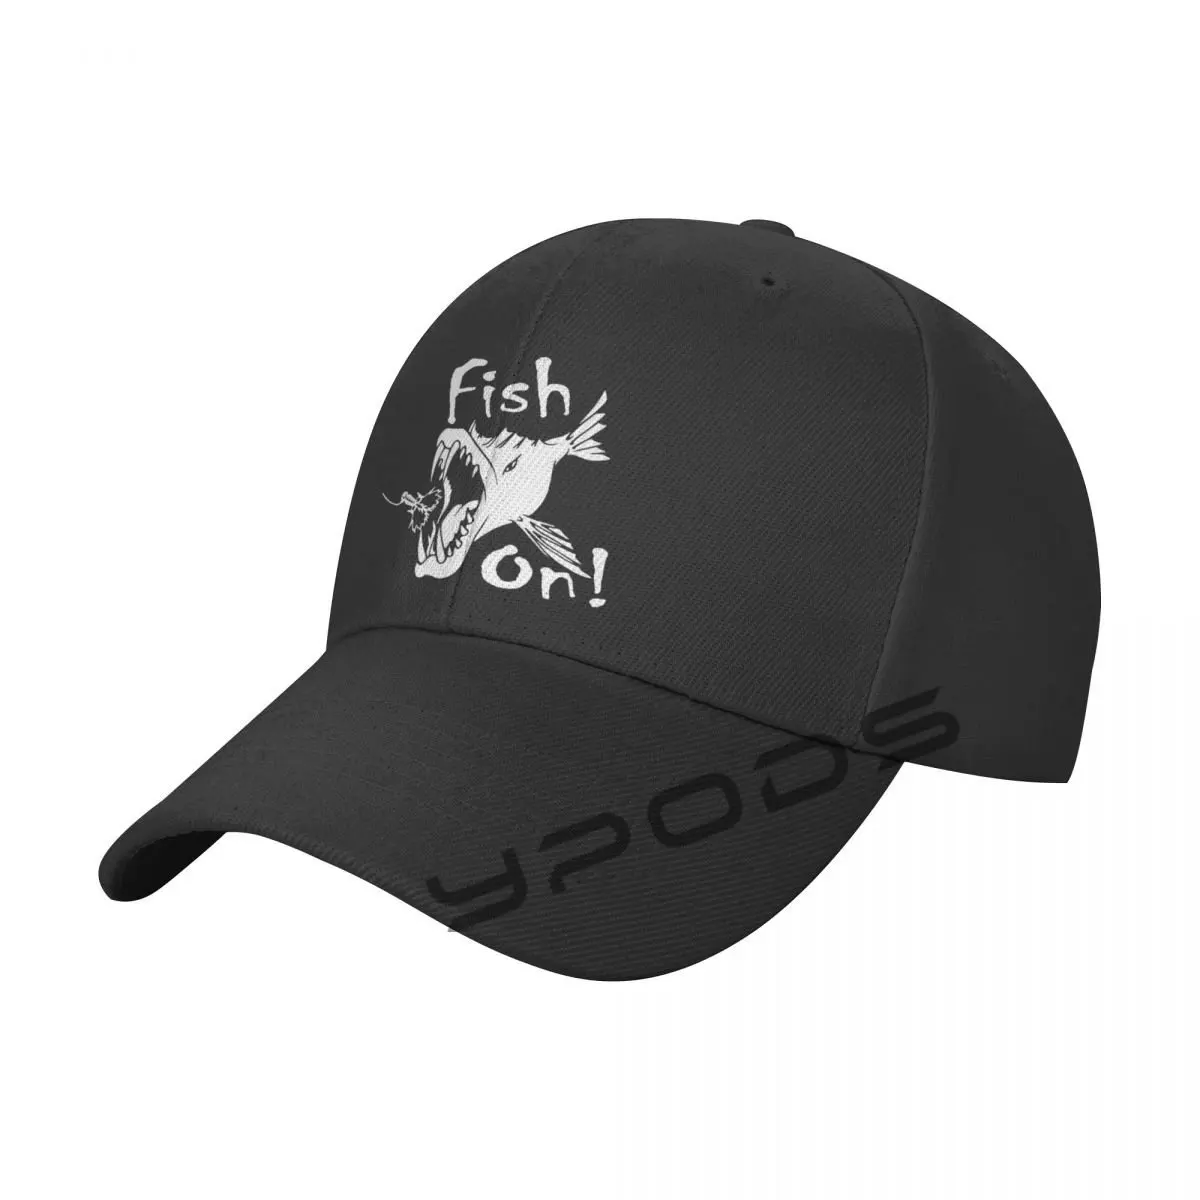 

Fishing Fish On Angry Bass Looking Left 1 Men's Classic Baseball Cap Adjustable Buckle Closure Dad Hat Sports Cap